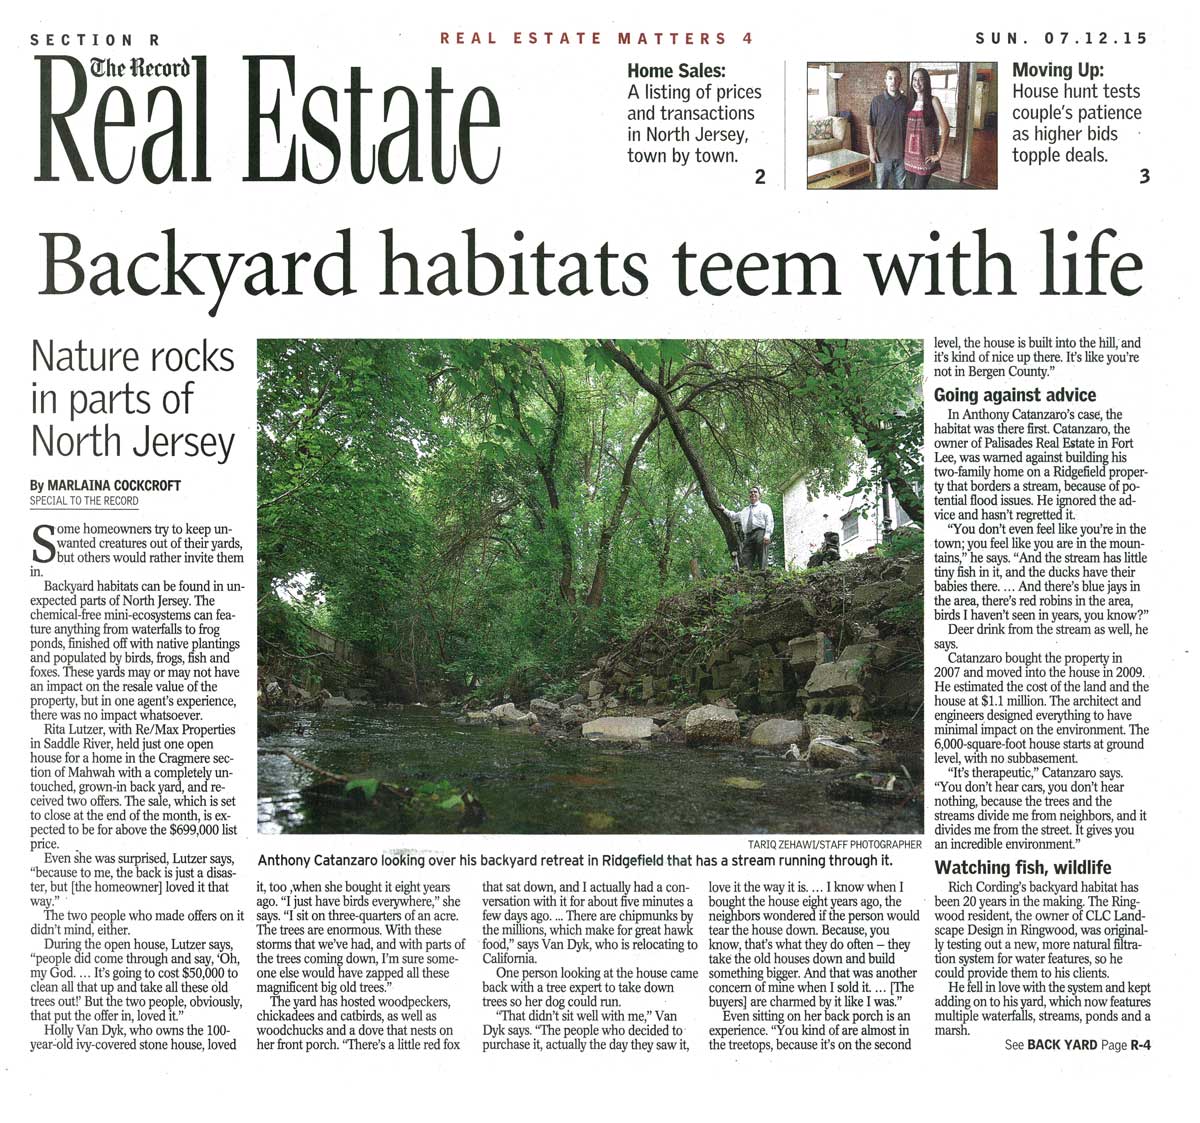 Article in The Record about Backyard Habitats - Page 1